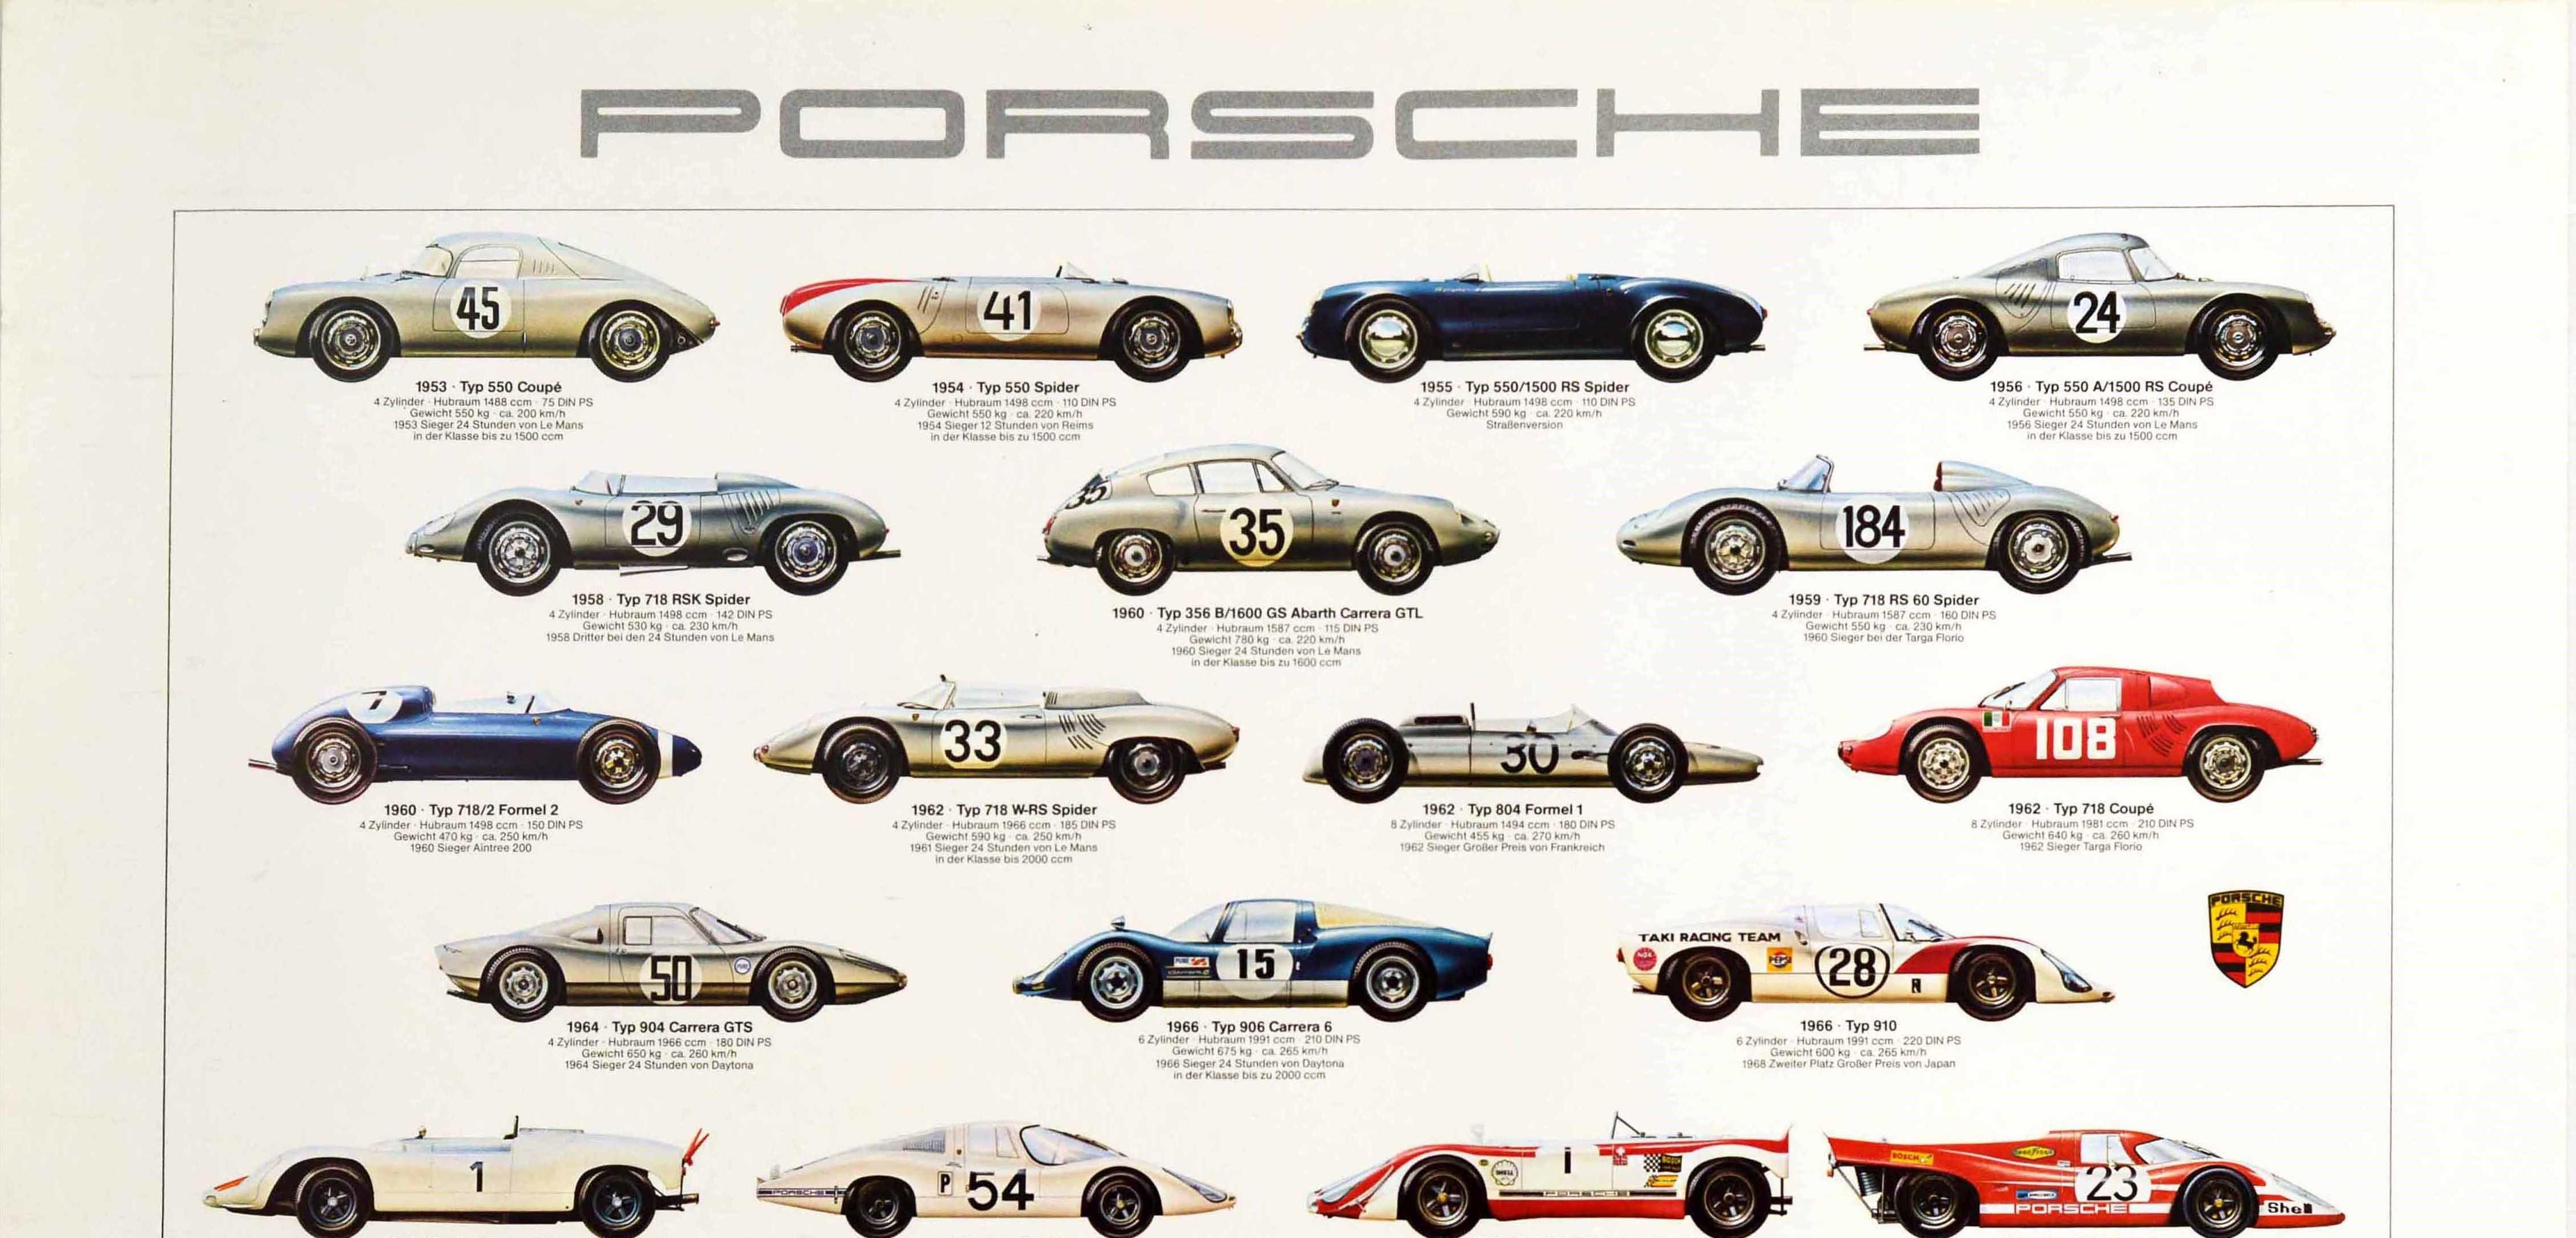 Original vintage advertising poster for Porsche car models depicting various sports cars including Formula One and F2 racing cars produced from the Typ 550 Coupe released in 1953 to the Typ 911 Carrera RSR Turbo released in 1974. Great artwork of